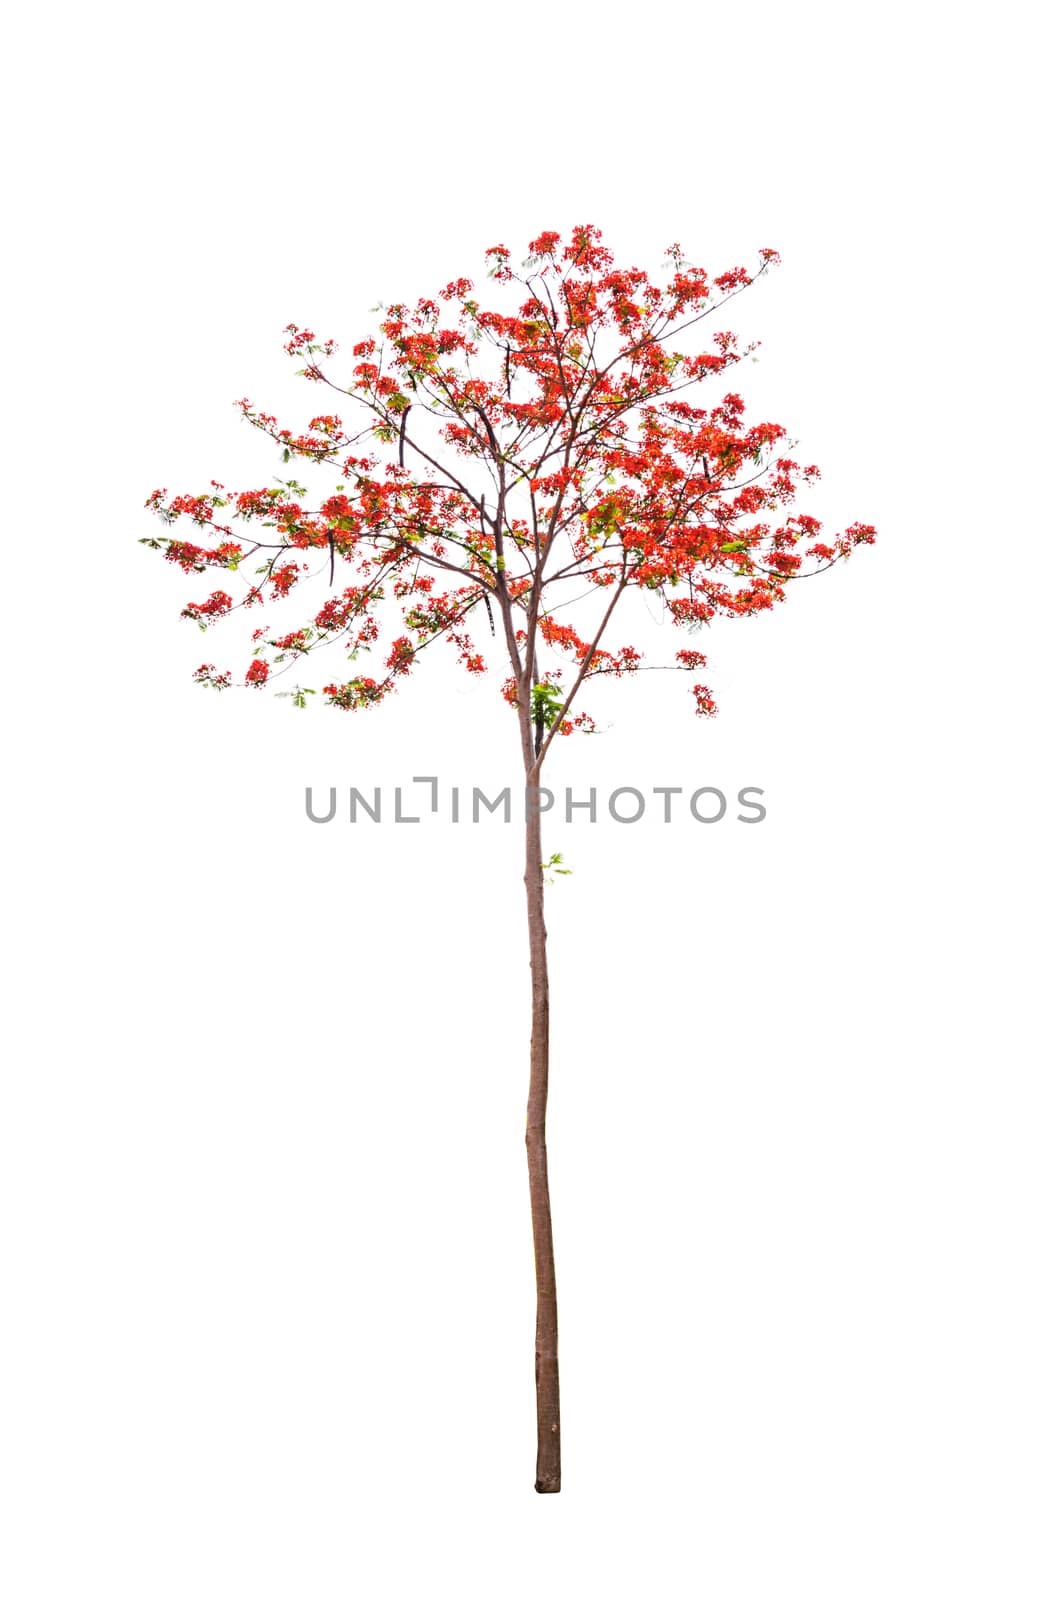 Peacock flowers tree Isolated on white background